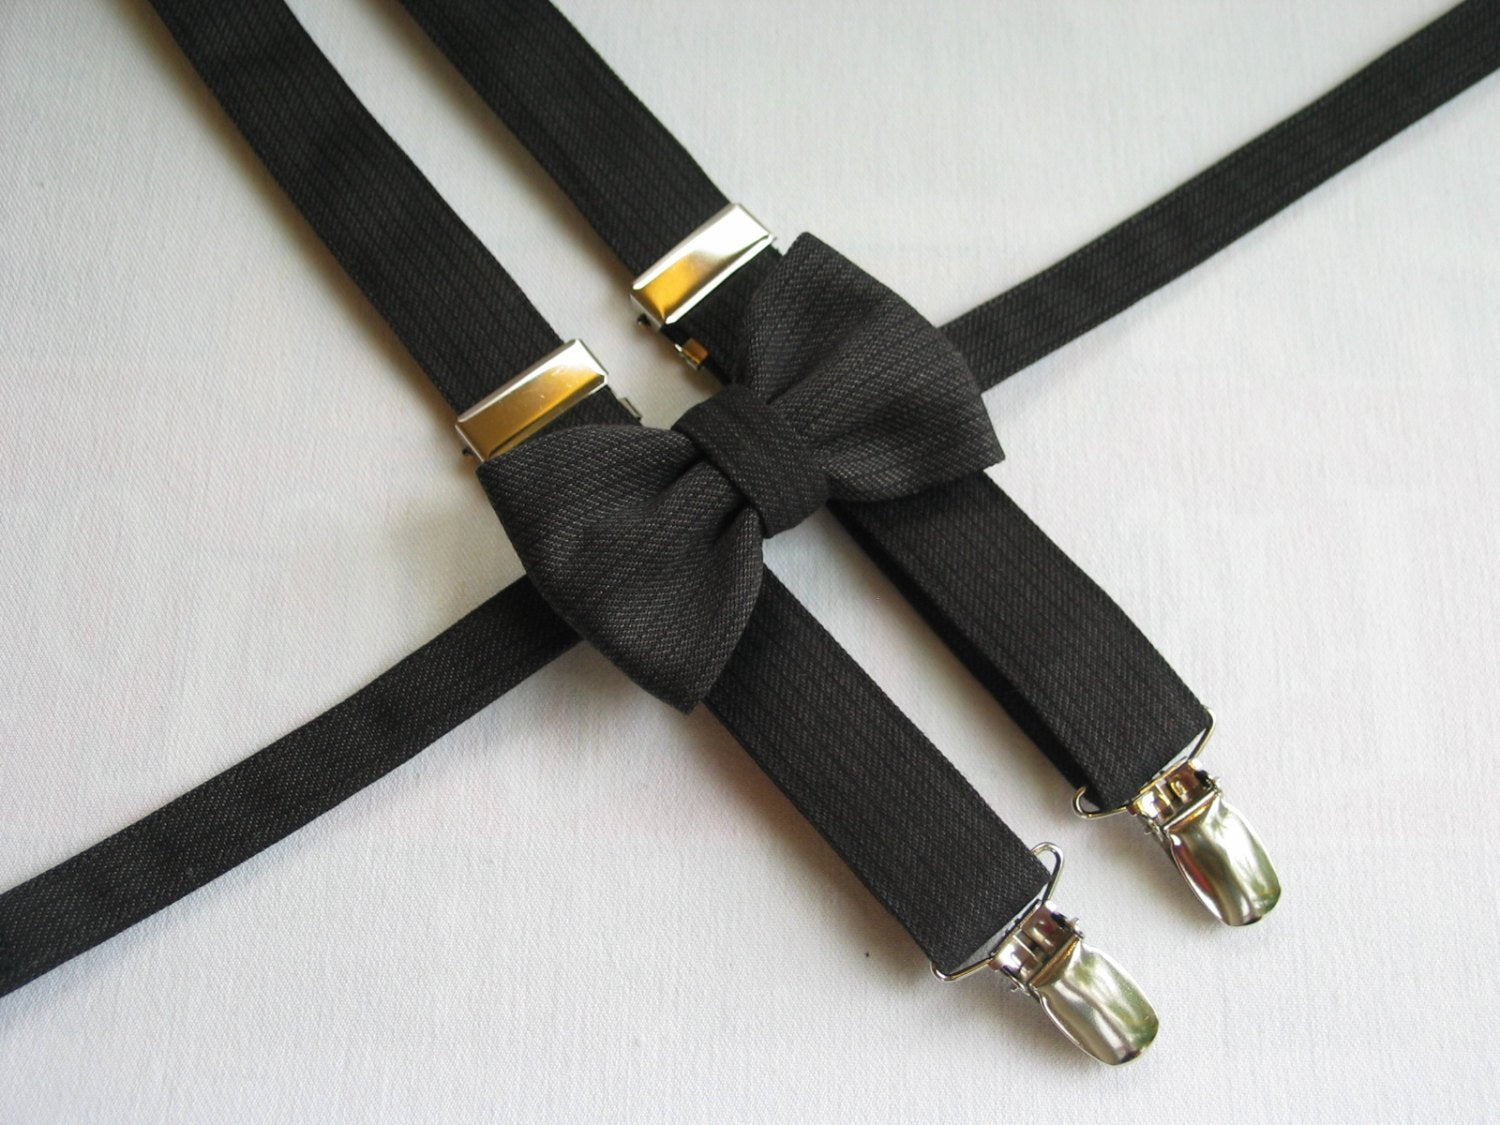 Charcoal Gray Bow Tie Suspenders-Taylors Tartans